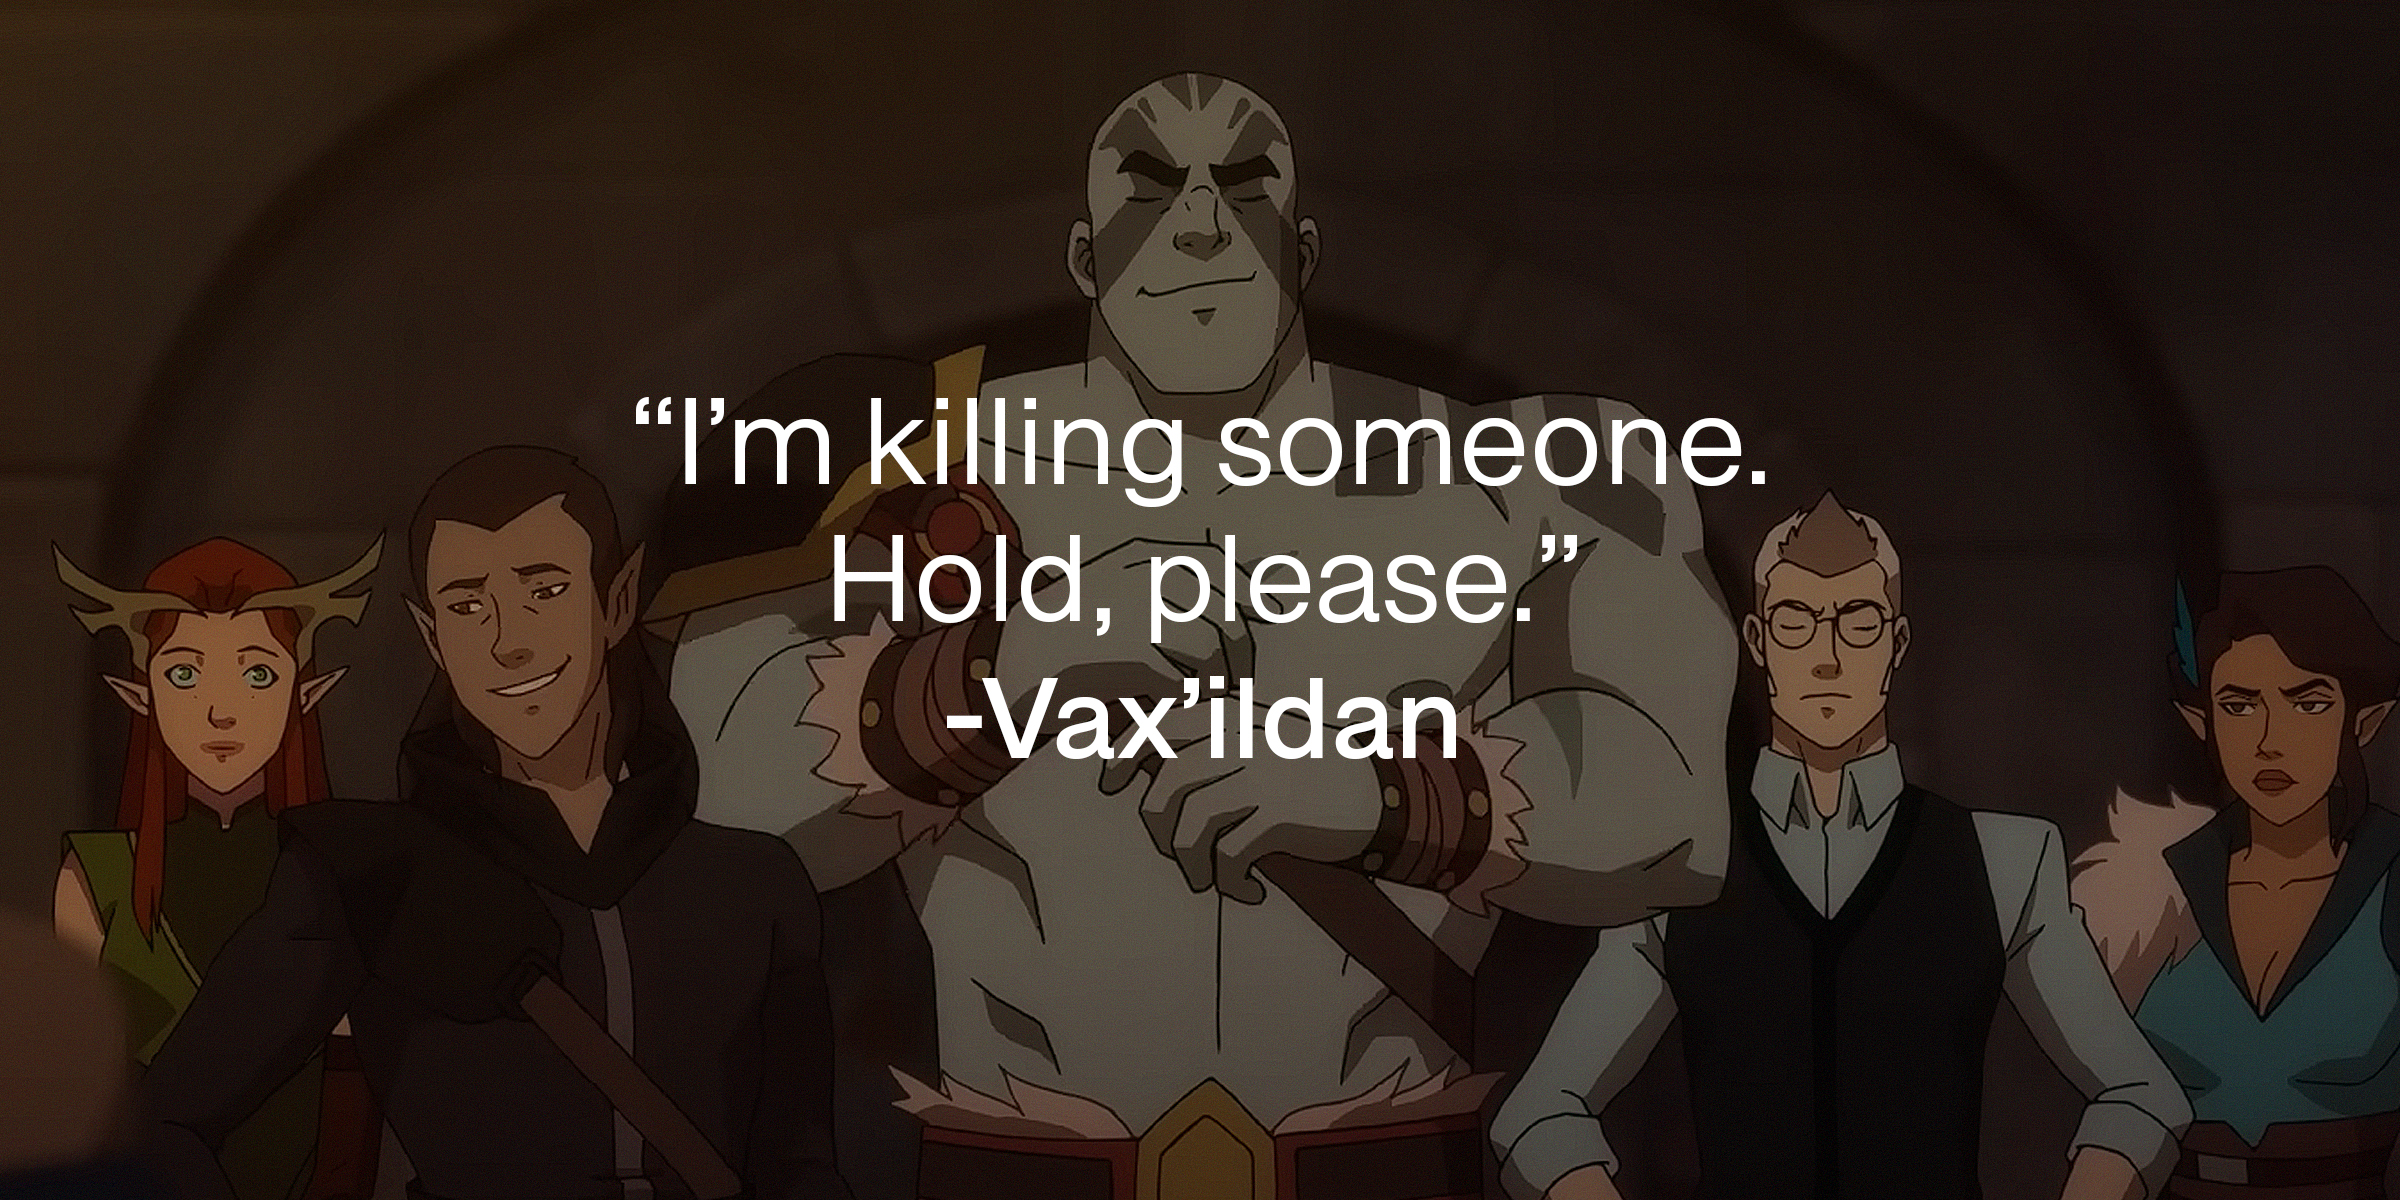 A picture of 'The Ragtag' group with a quote by Vax’ildan: “I’m killing someone. Hold, please.” | Source: youtube.com/PrimeVideo